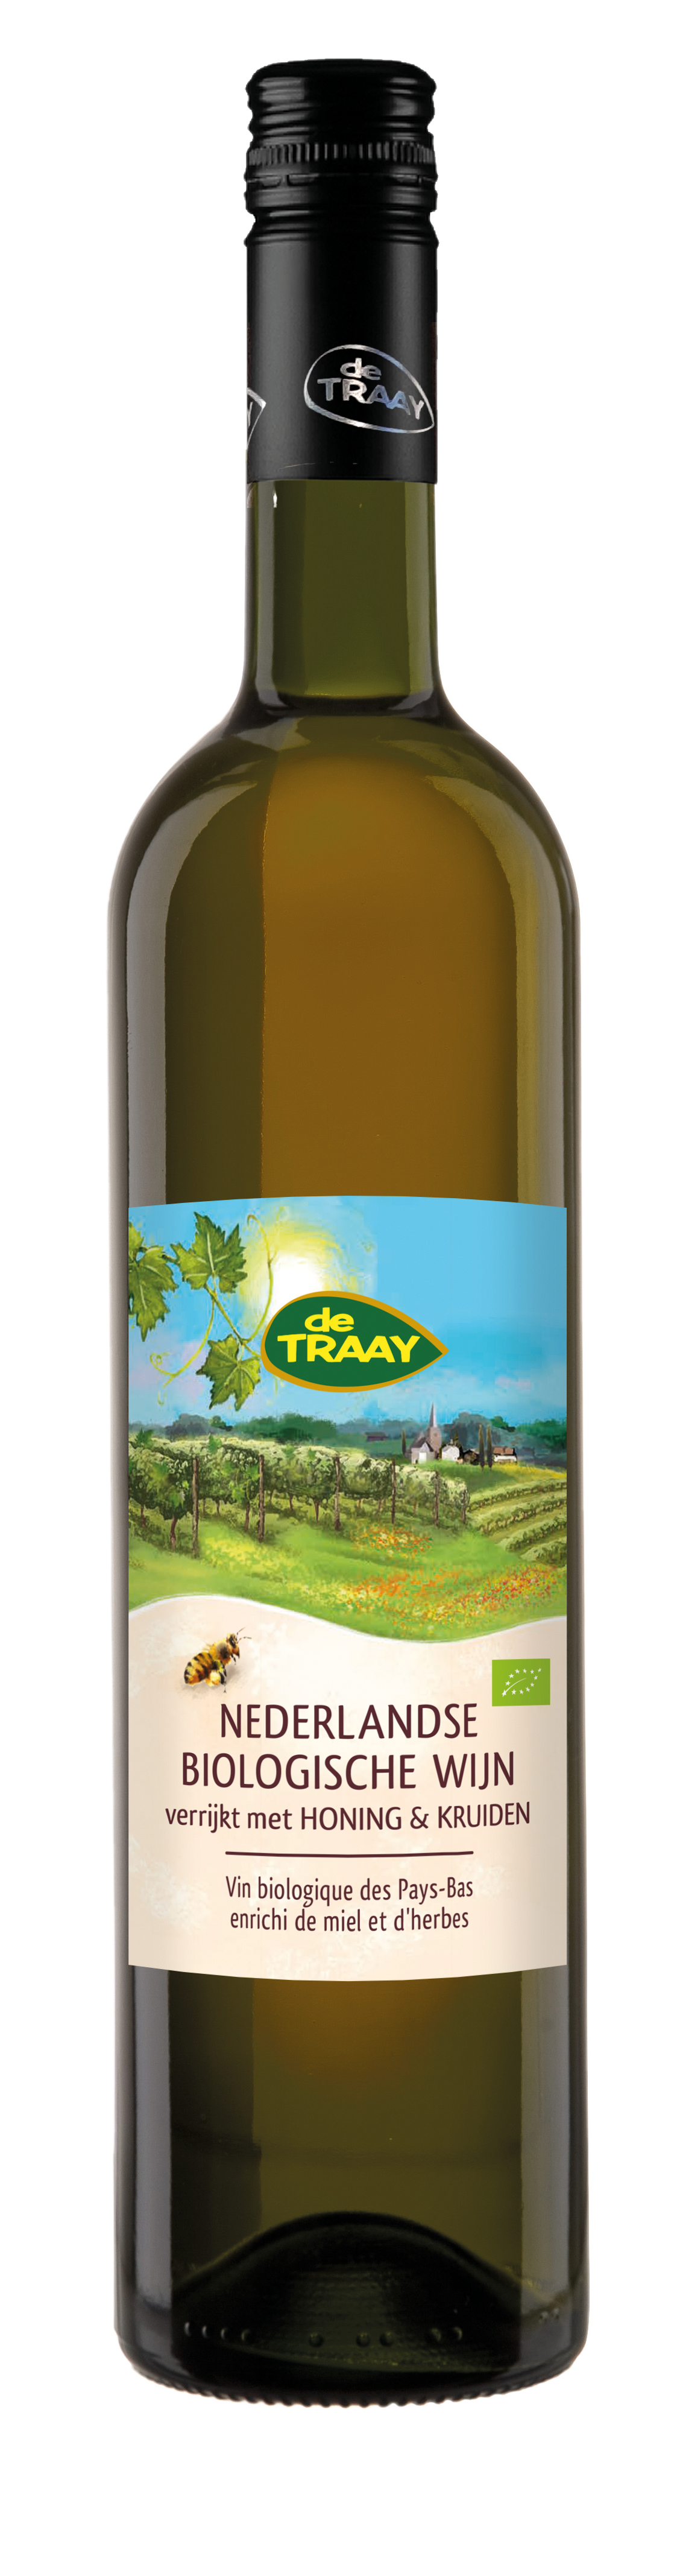 Dutch organic white wine enriched with honey & herbs